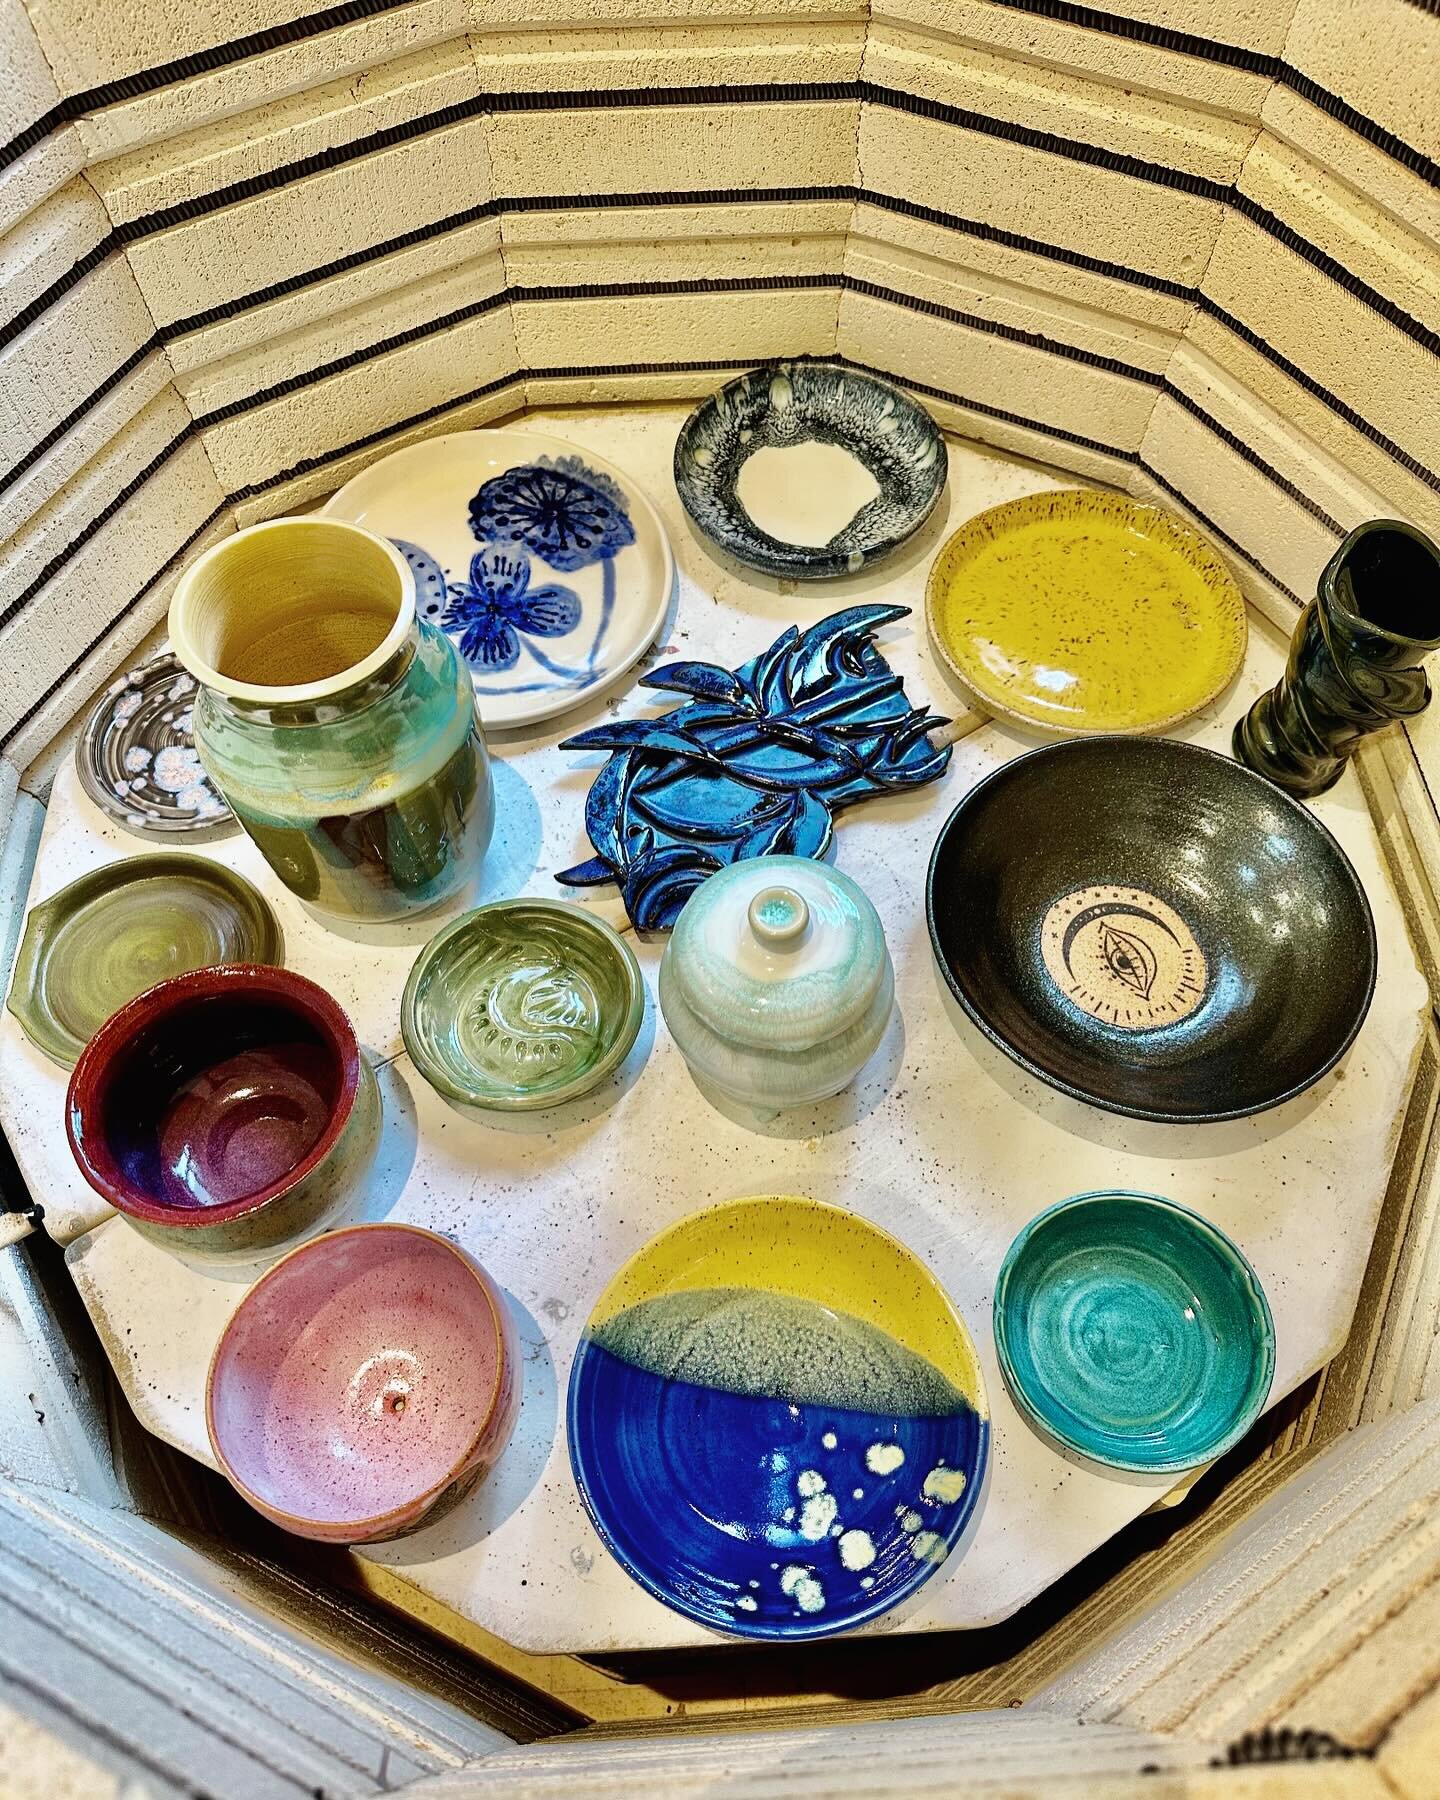 Want to learn how to make your very own pottery? Our April pottery classes with @amyhalko start the week of the 22nd! 

Classes are open to all levels. Beginners learn the basics of throwing cylinders, bowls, mugs, and vases. Students with experience